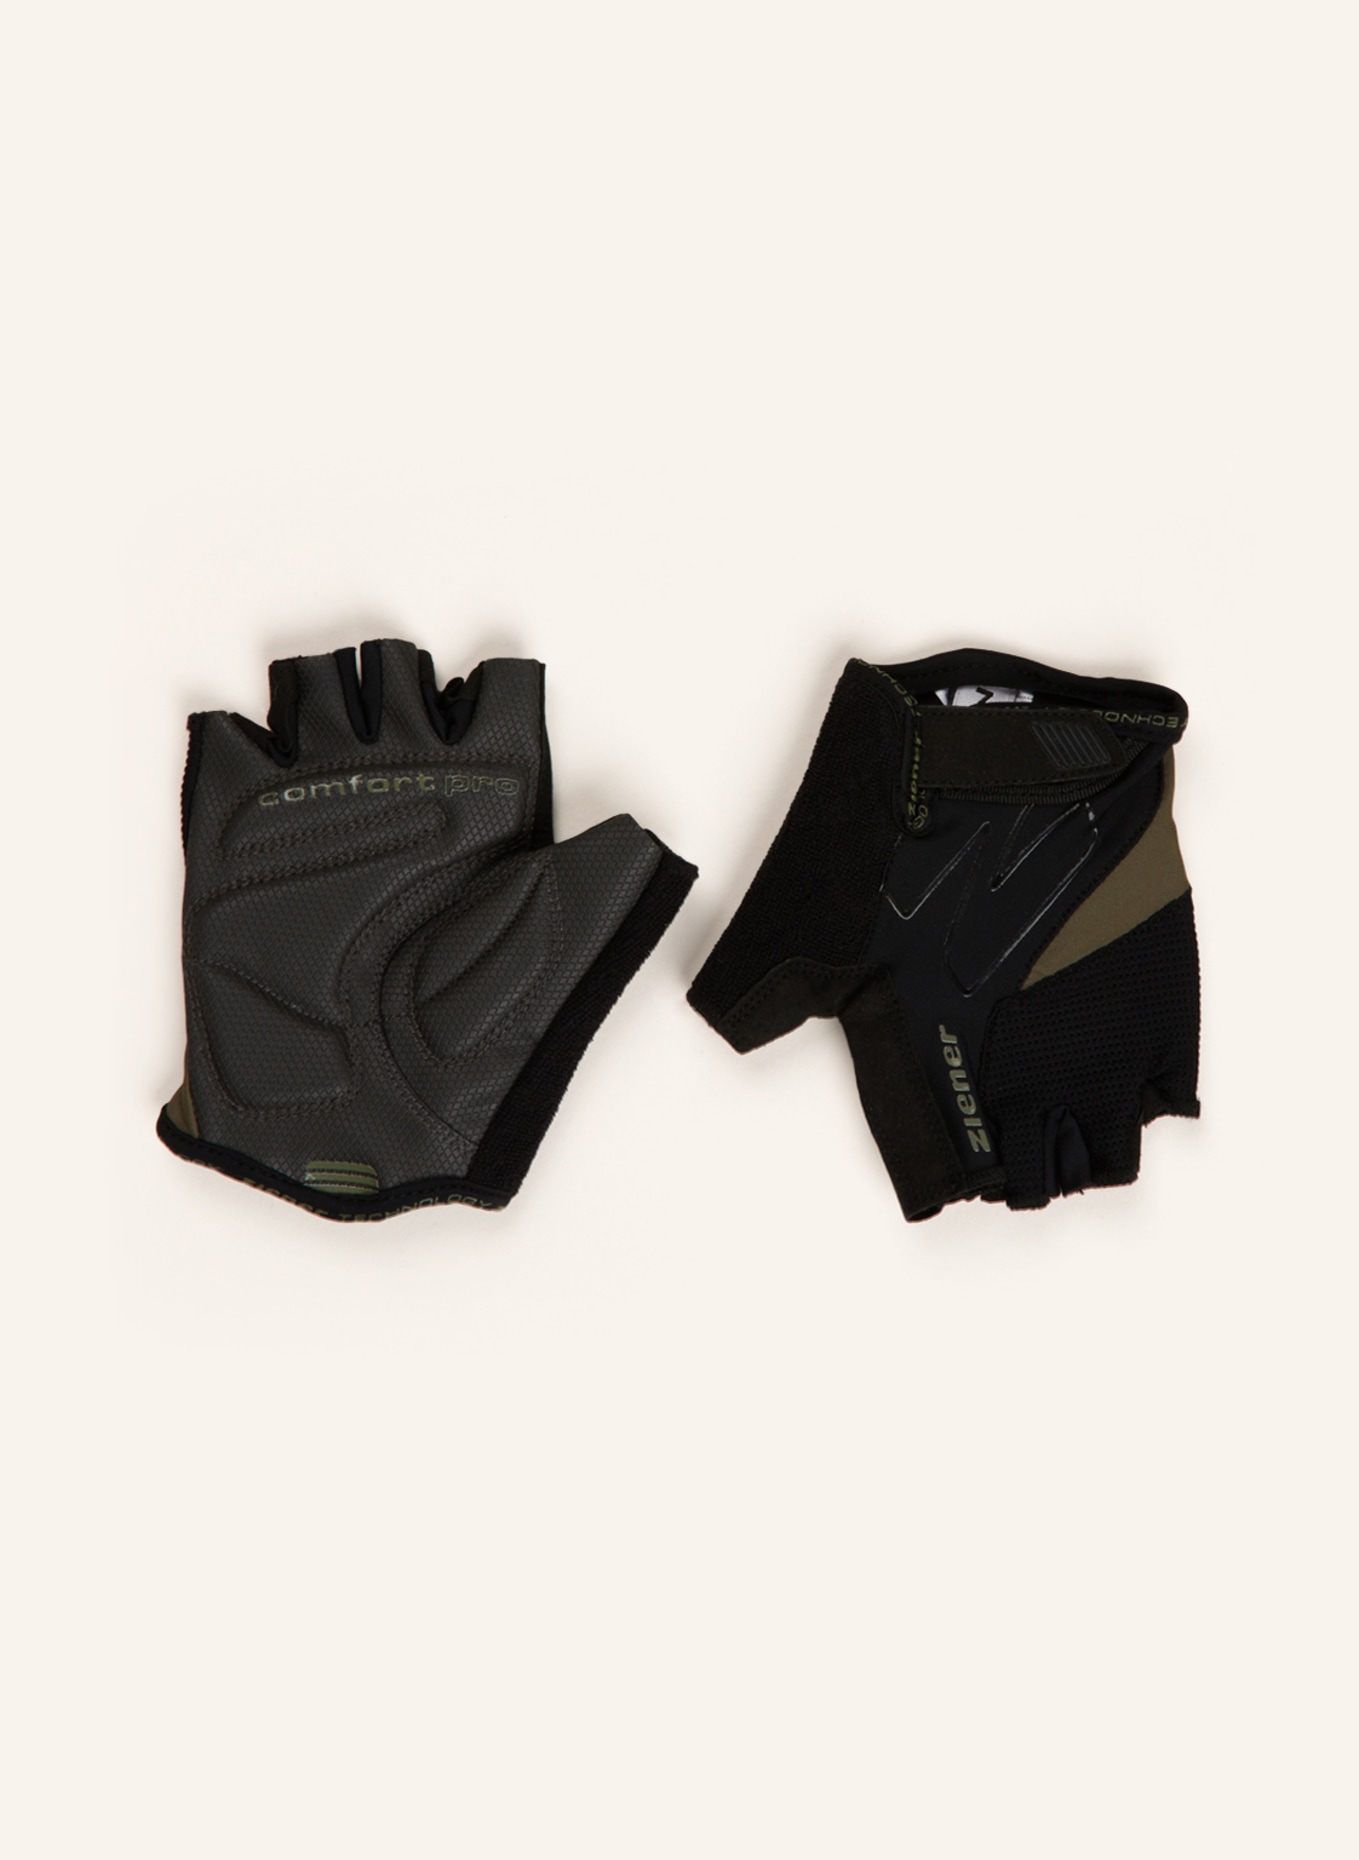 ziener khaki black/ Cycling gloves in CRAVE